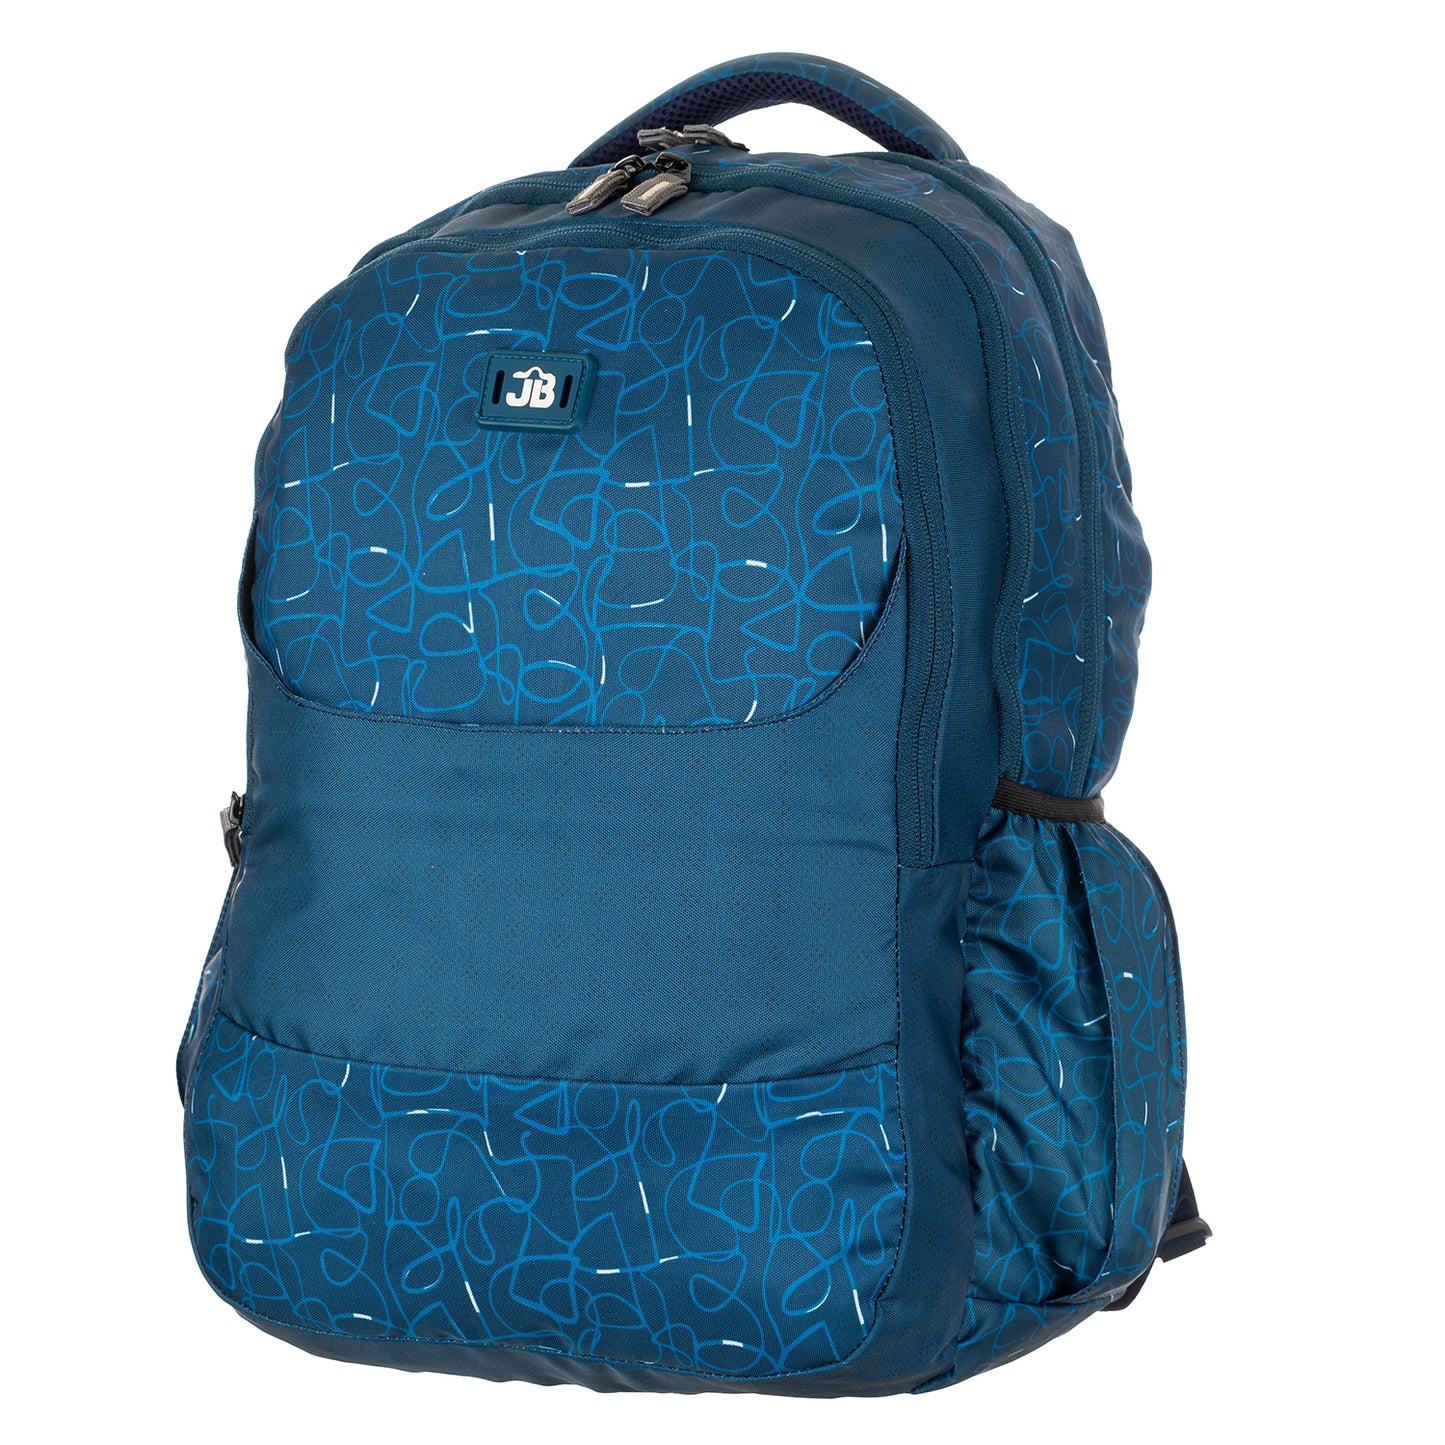 Blue Horizon Printed School/College Backpack -19 Inch (New Blue)